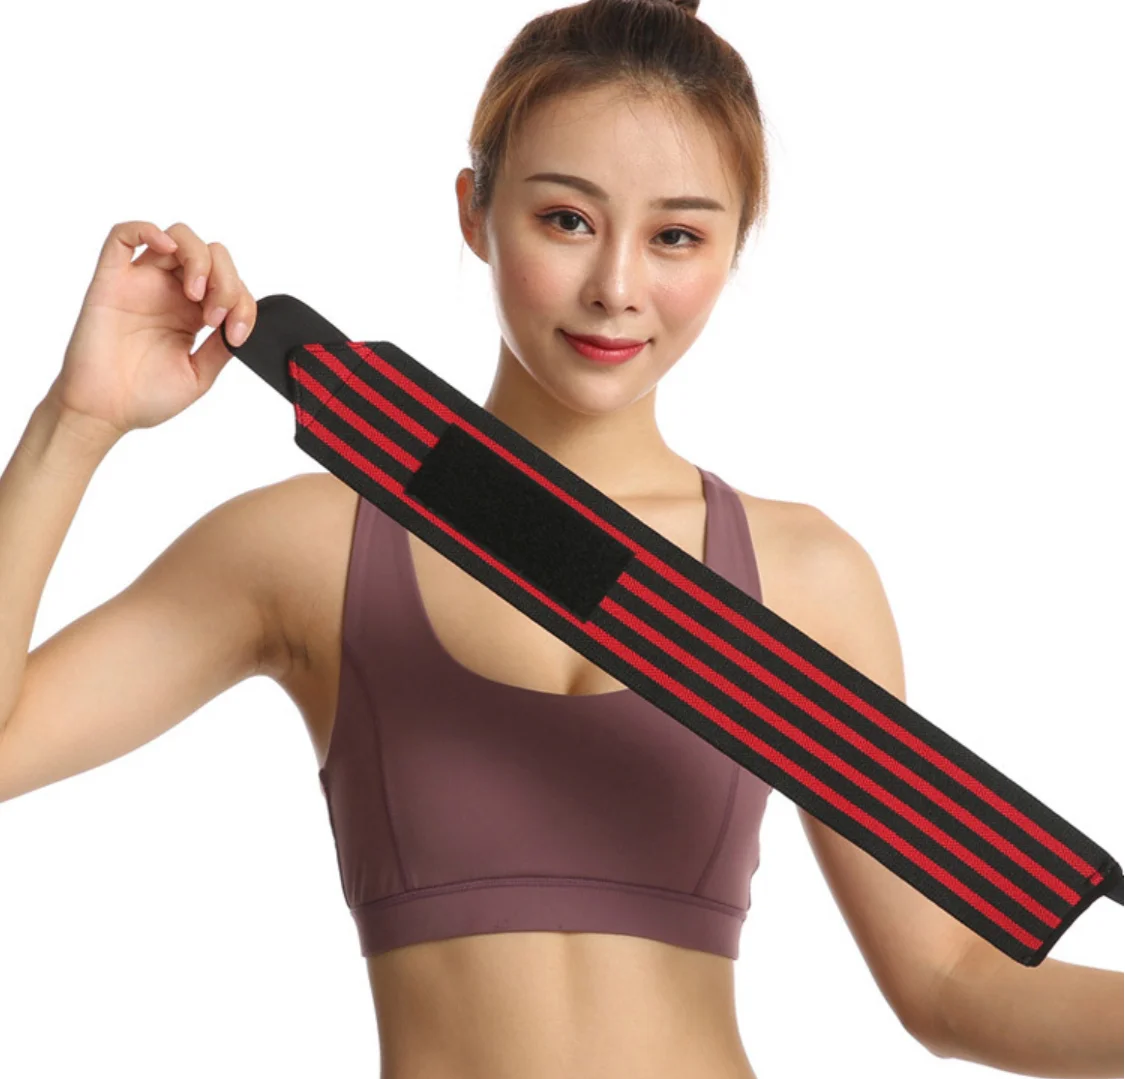 

Low MOQ 20 Designs Professional Cross Fitness Training Wrist Wraps Weight Lifting Wrist Straps, 6 colours